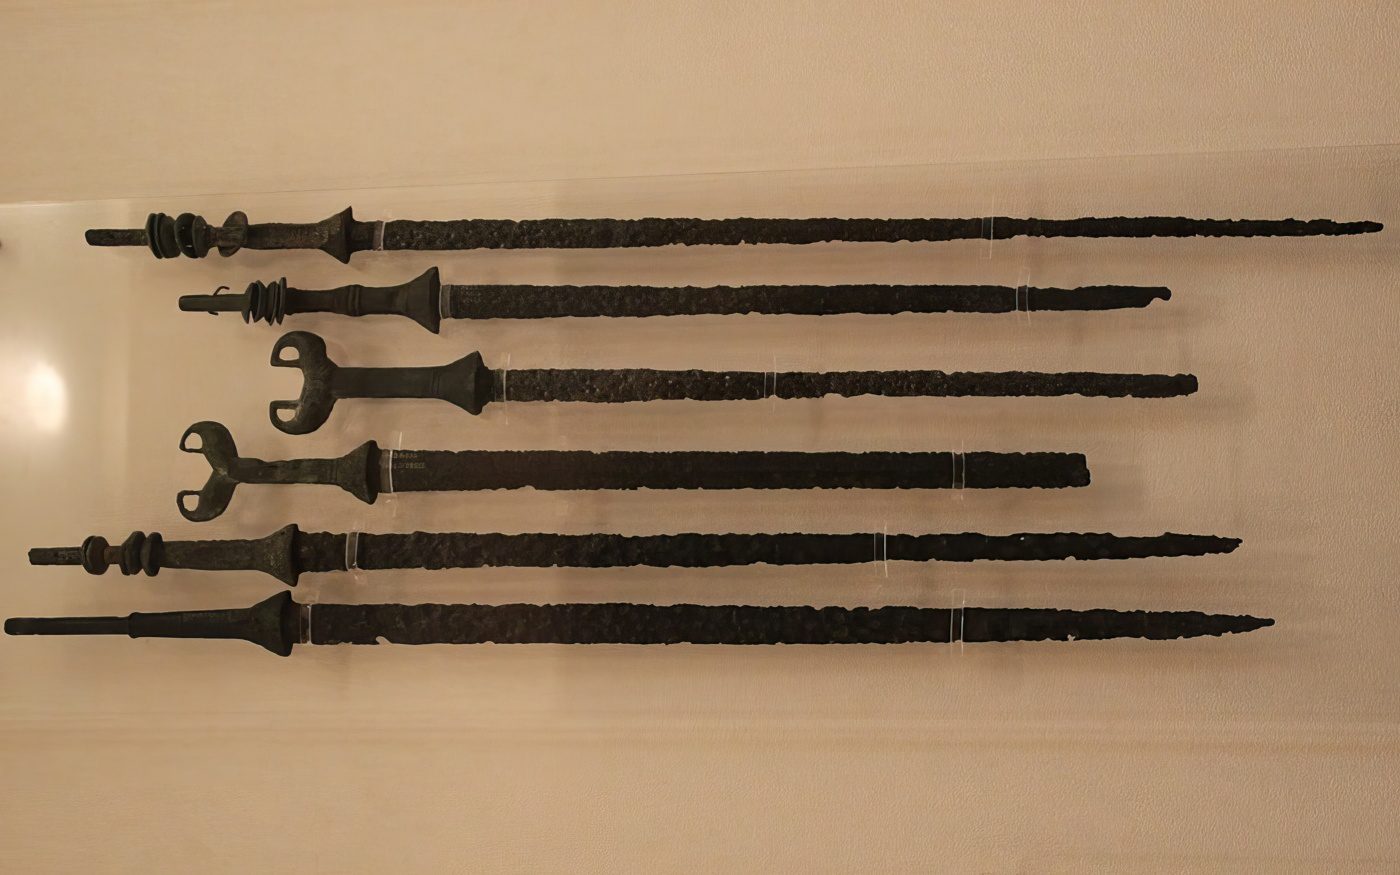 The Oldest Swords of Ancient China: Their Development and Use in Warfare